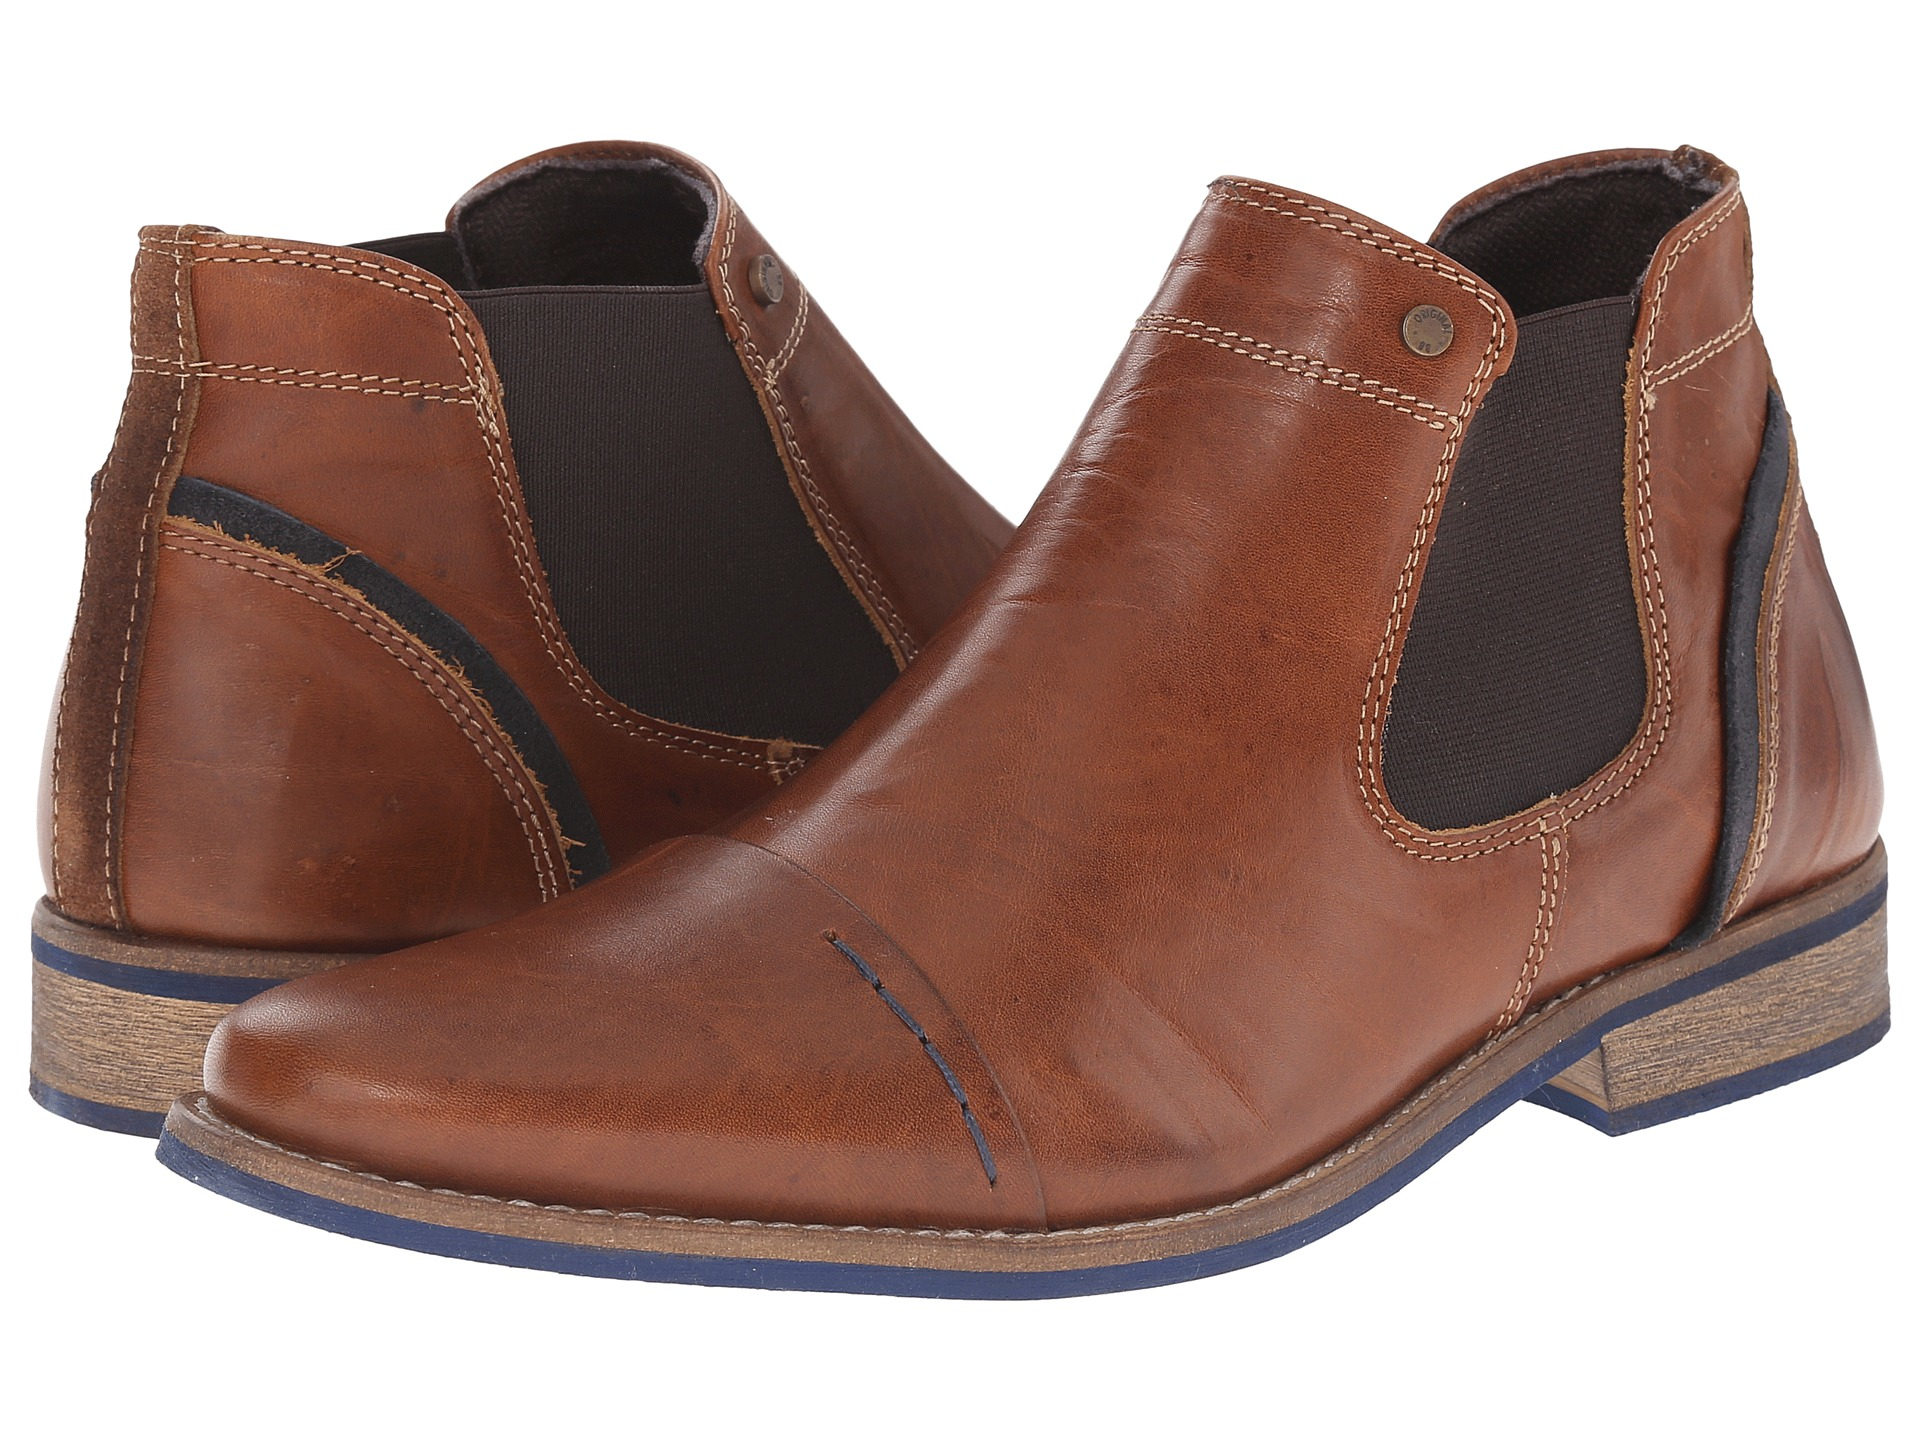 Detail Chelsea Boots in Tan Leather 